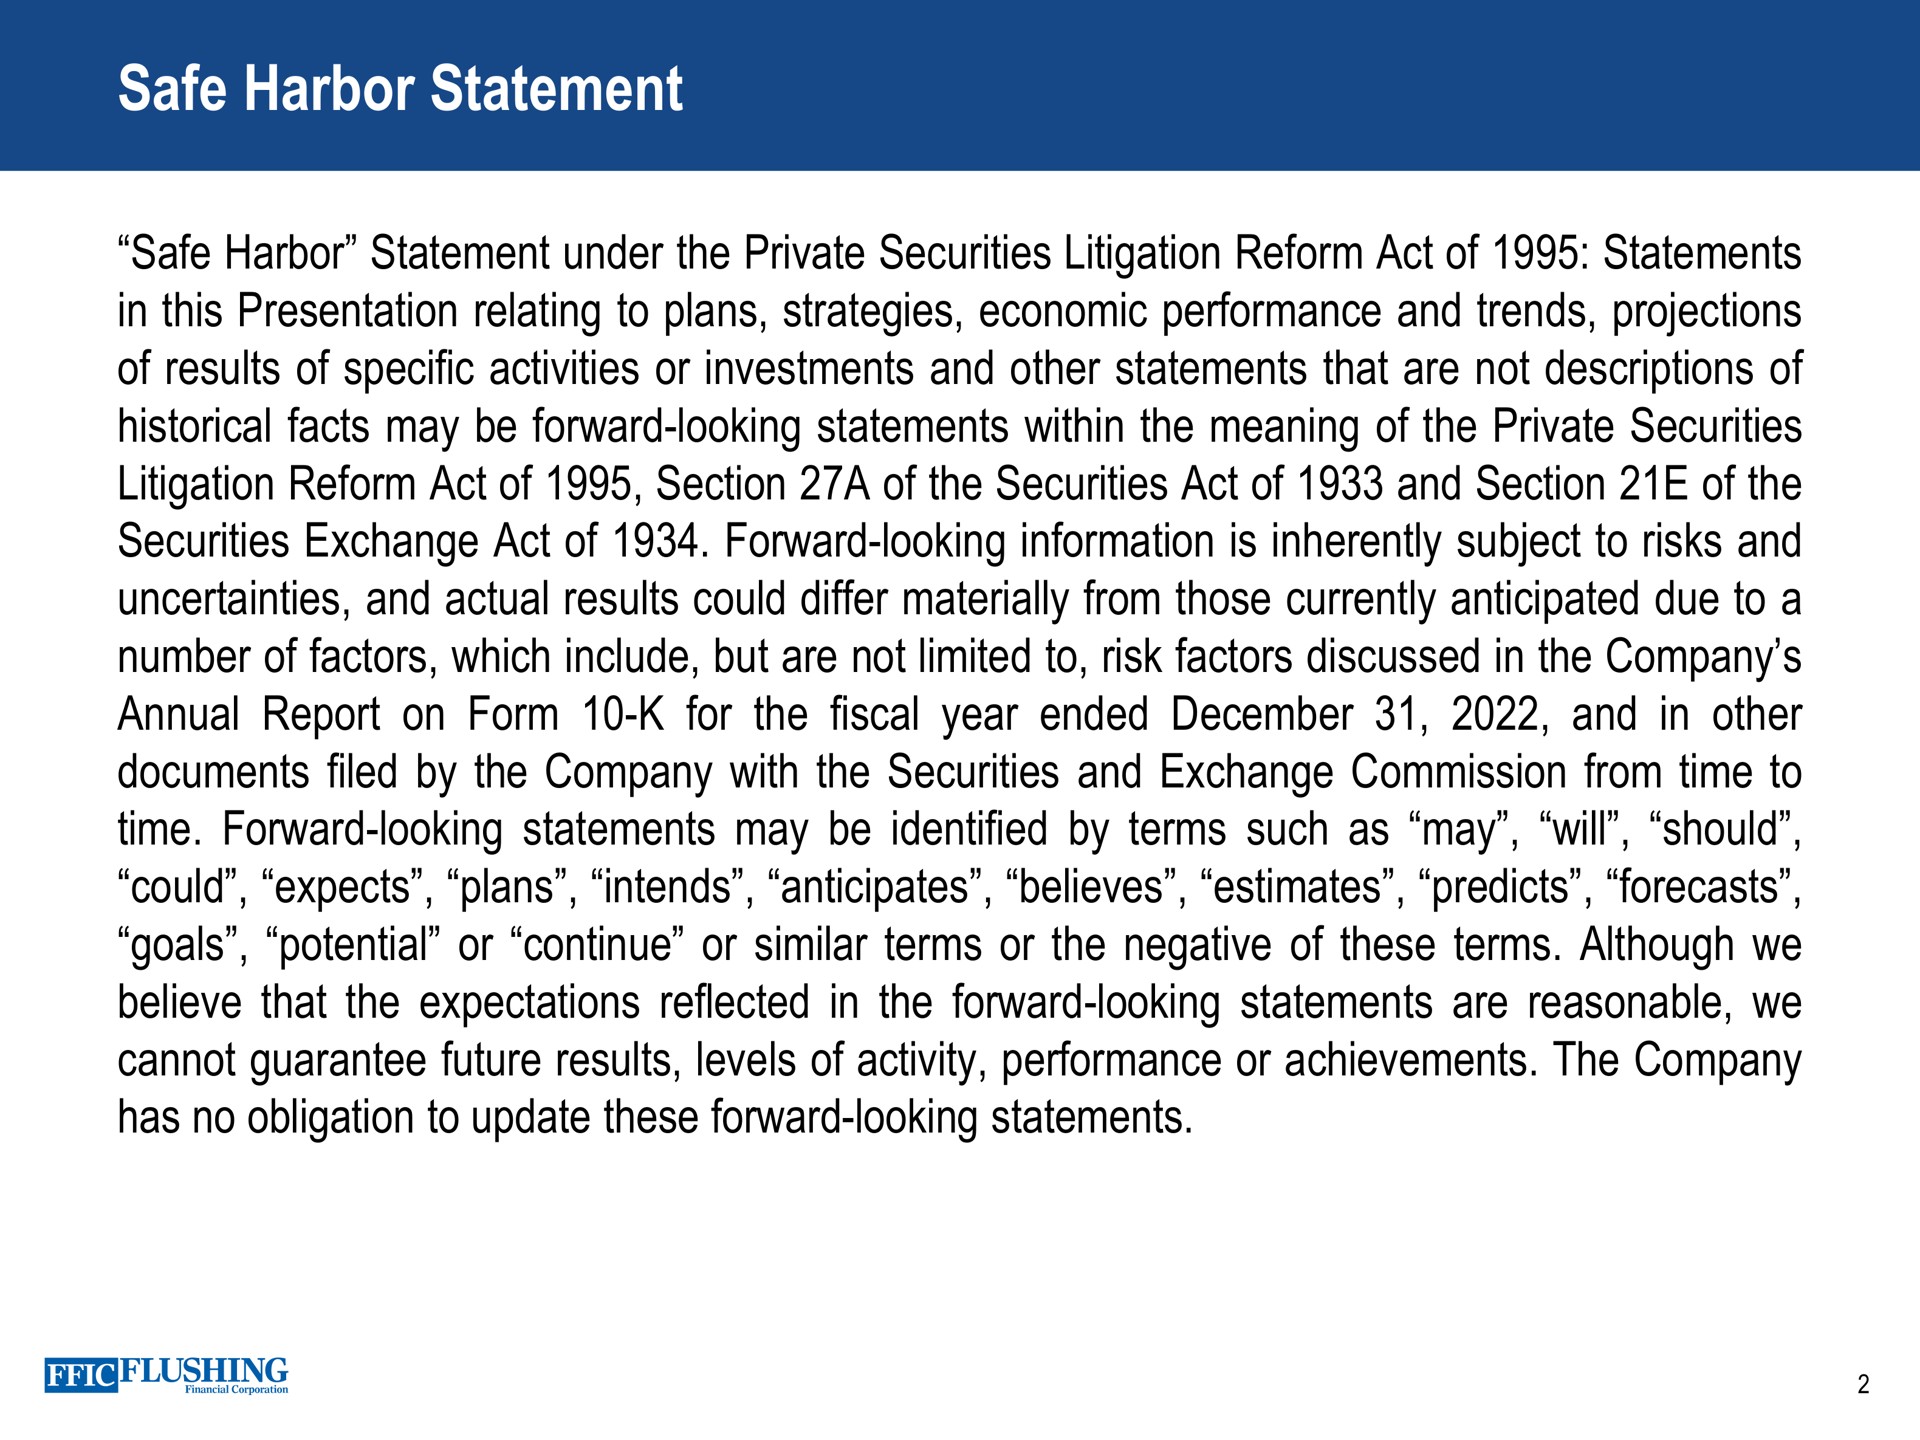 safe harbor statement under the private securities litigation reform act of statements of results of specific activities or investments and other statements that are not descriptions of historical facts may be forward looking statements within the meaning of the private securities litigation reform act of section a of the securities act of and section of the securities exchange act of forward looking information is inherently subject to risks and number of factors which include but are not limited to risk factors discussed in the company annual report on form for the fiscal year ended and in other documents filed by the company with the securities and exchange commission from time to time forward looking statements may be identified by terms such as may will should could expects plans intends anticipates believes estimates predicts forecasts believe that the expectations reflected in the forward looking statements are reasonable we cannot guarantee future results levels of activity performance or achievements the company | Flushing Financial